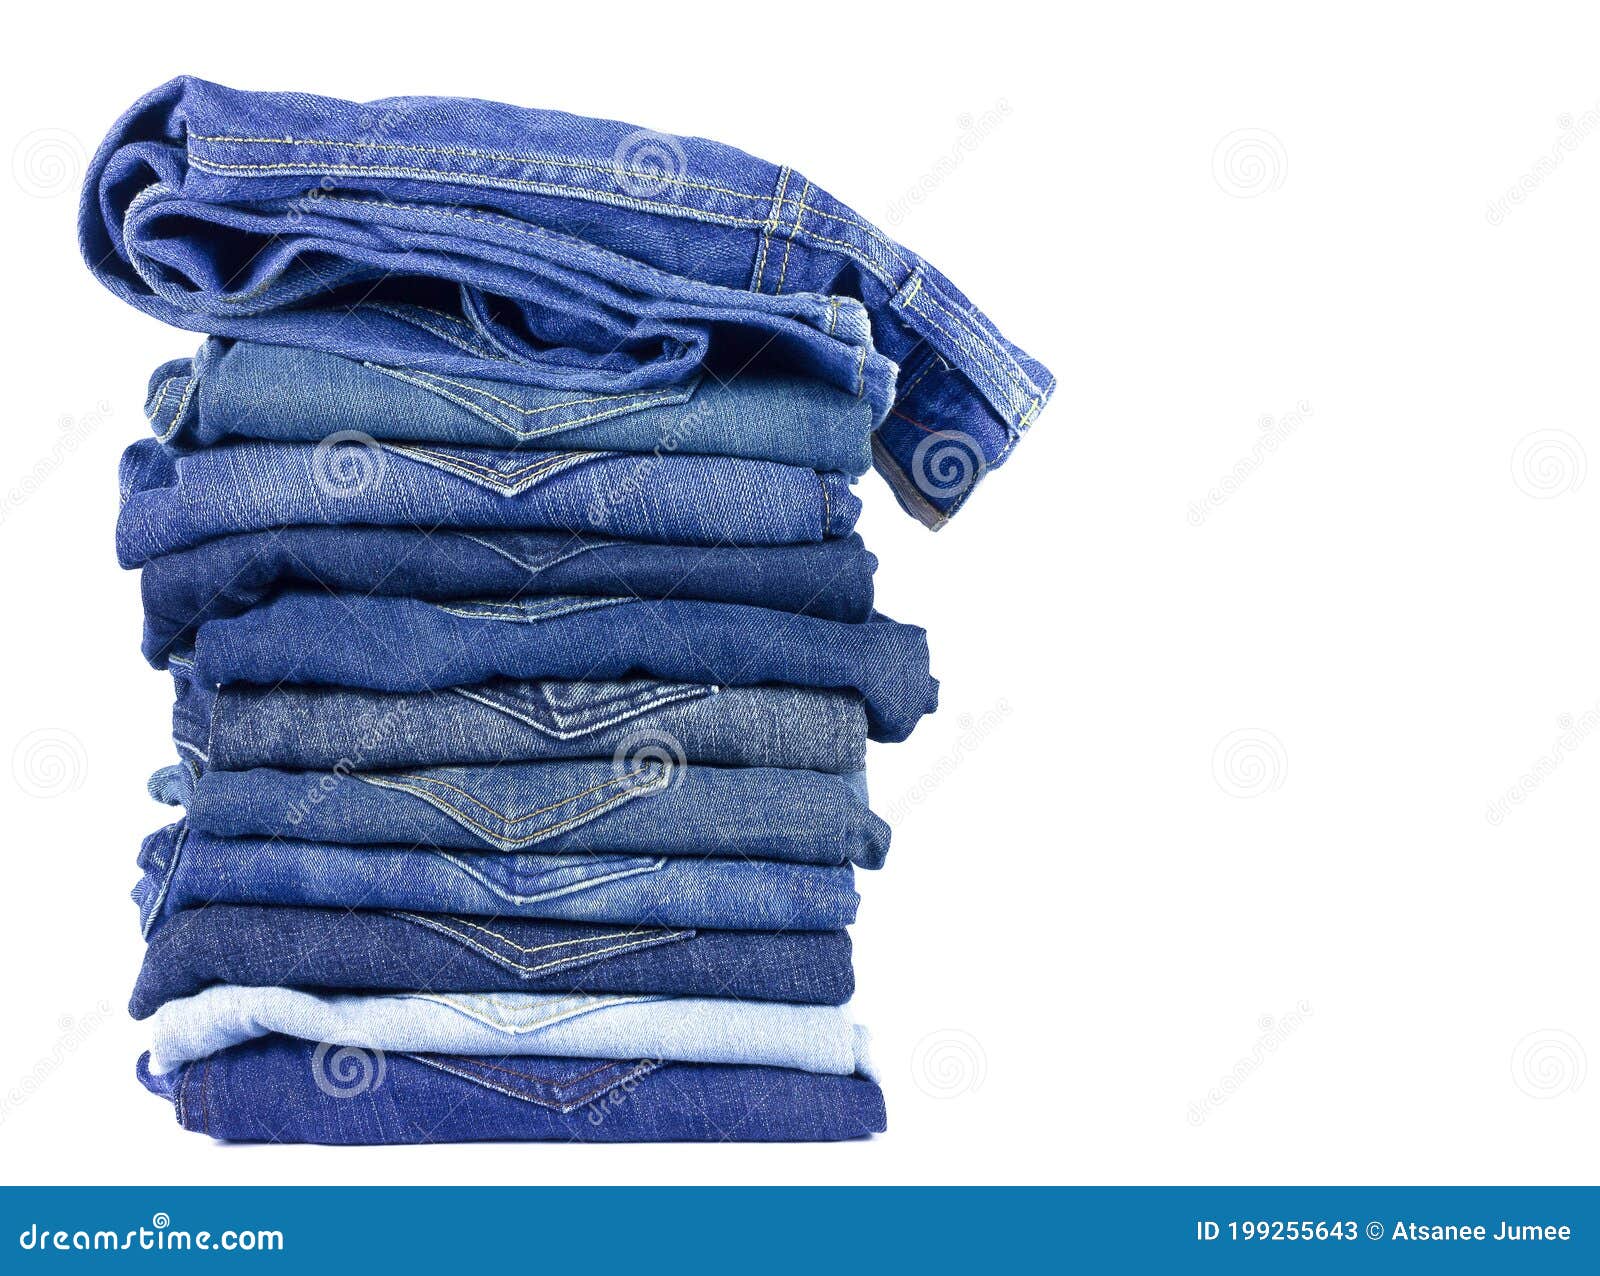 Jeans Denim Isolated on White Background Stock Image - Image of cotton ...